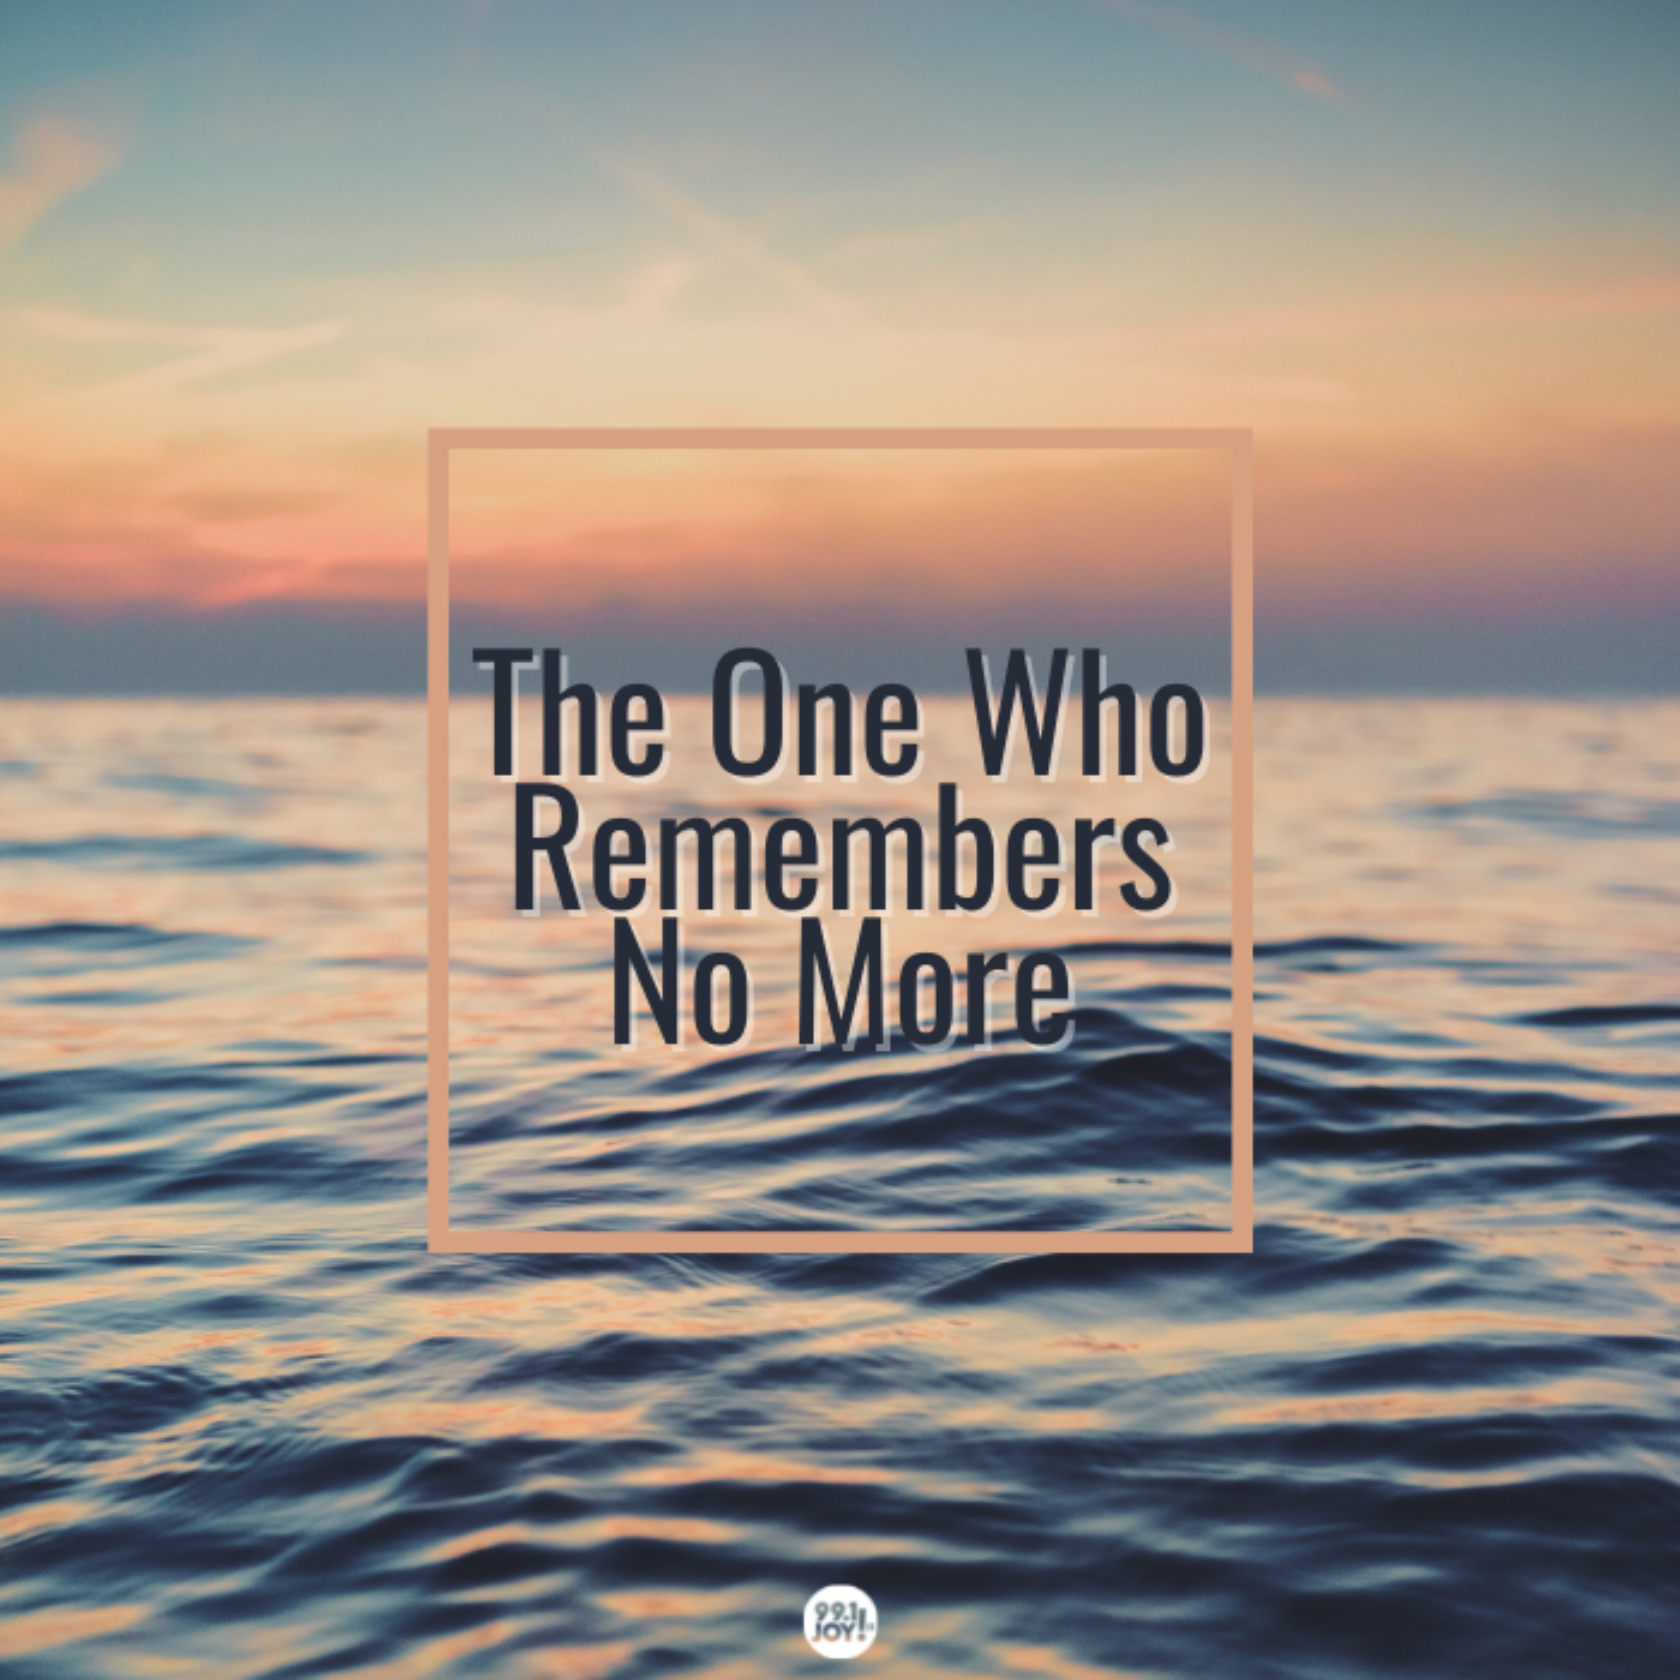 The One Who Remembers No More